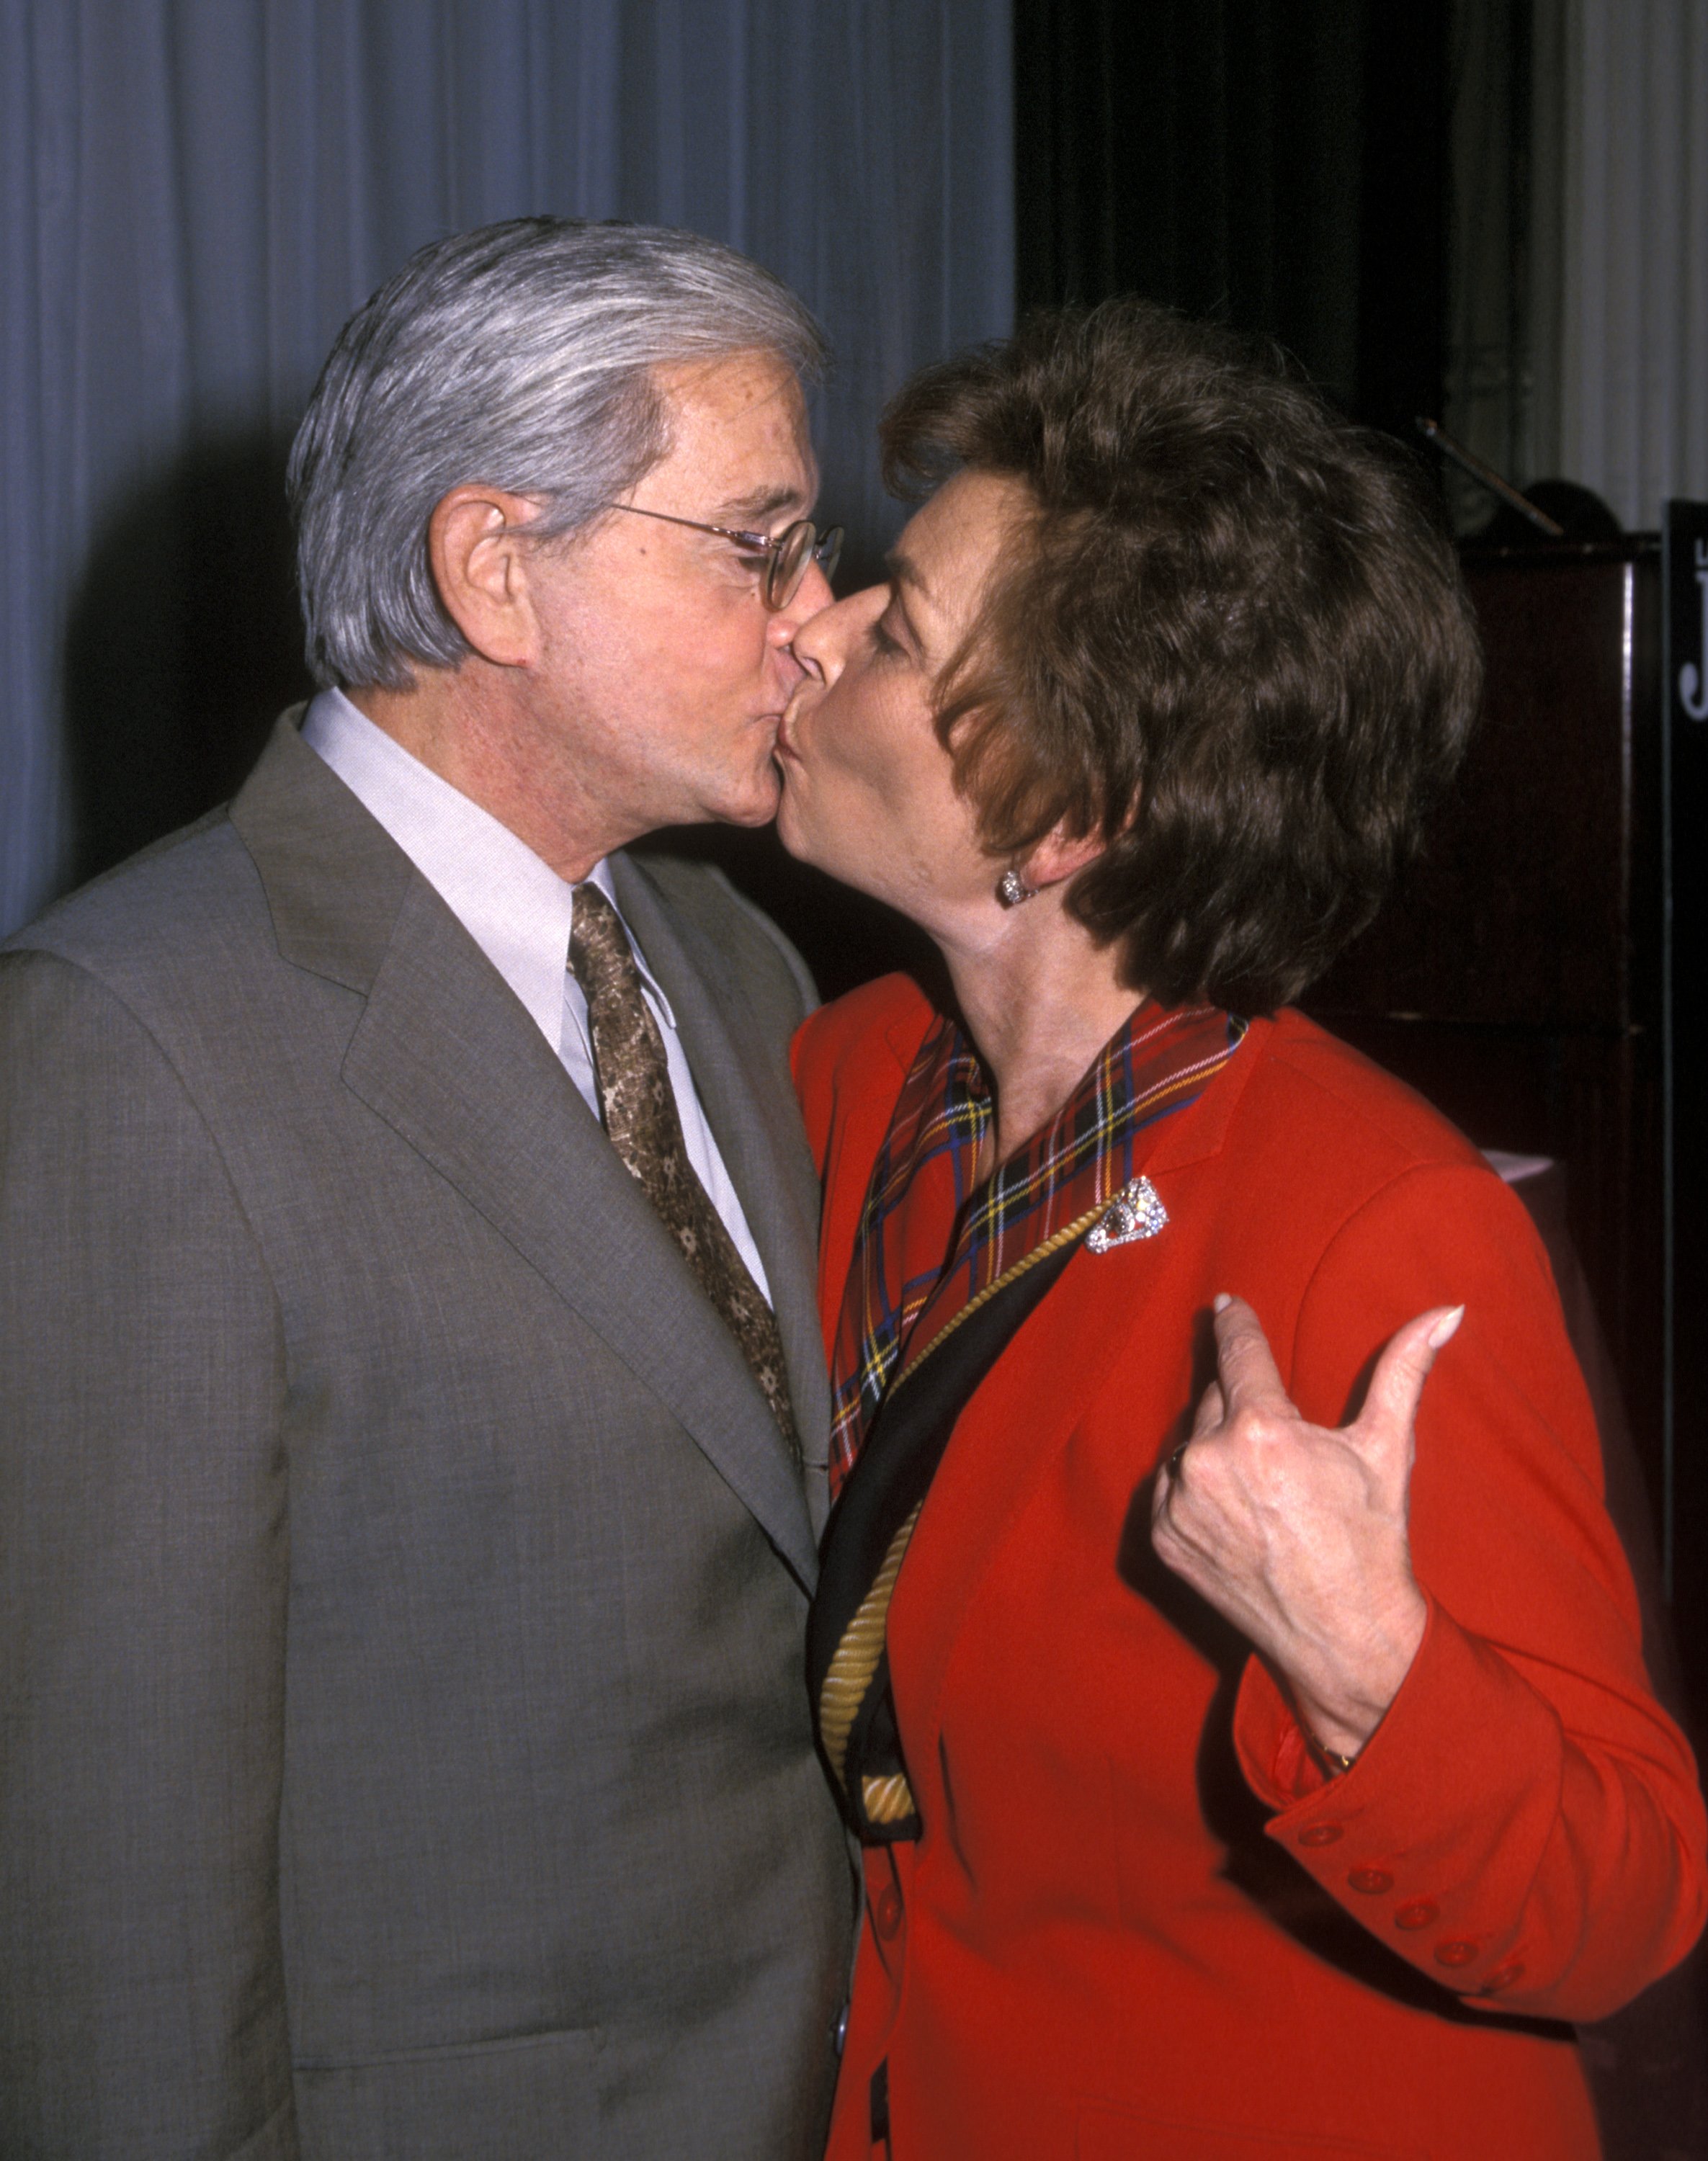 Jerry Sheindlin and Judy Sheindlin at Ladies' Home Journal "One Smart Lady Award" on February 23, 2000 at the Waldorf Astoria Hotel in New York City. | Source: Getty Images